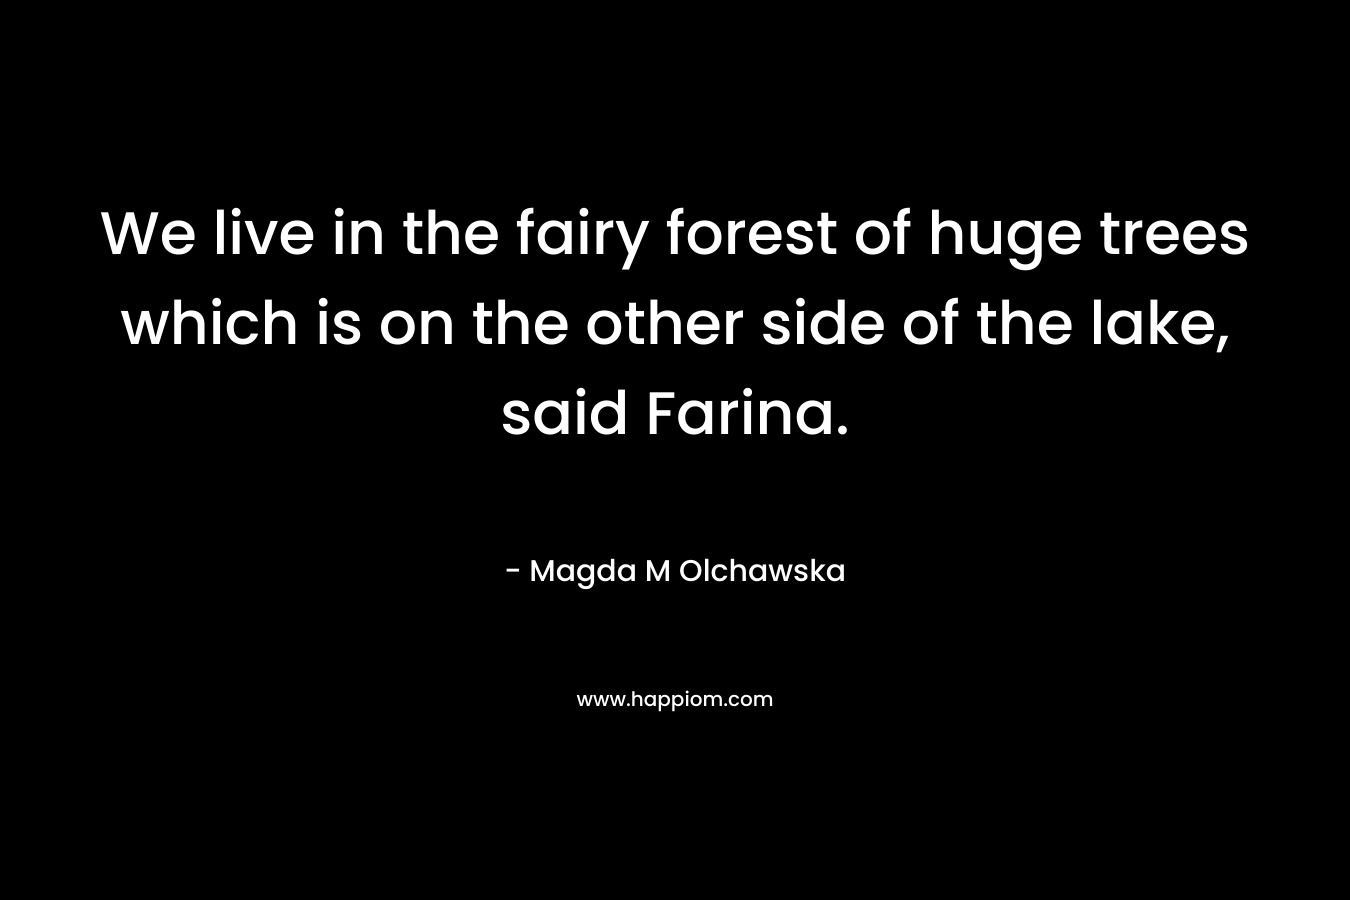 We live in the fairy forest of huge trees which is on the other side of the lake, said Farina.